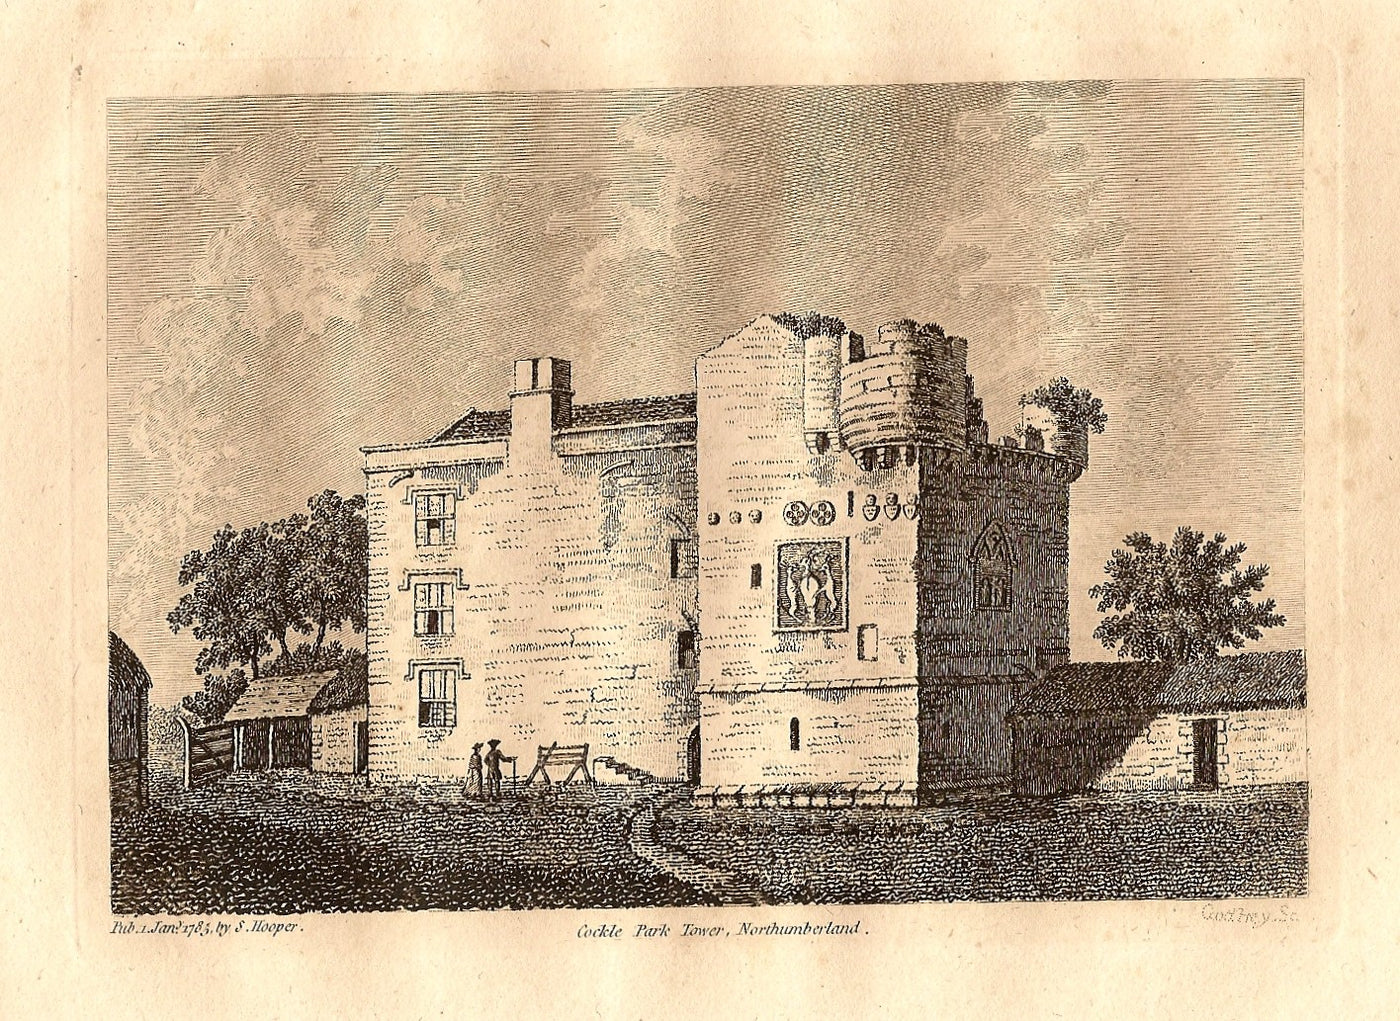 Cocklepark Tower Northumberland antique print